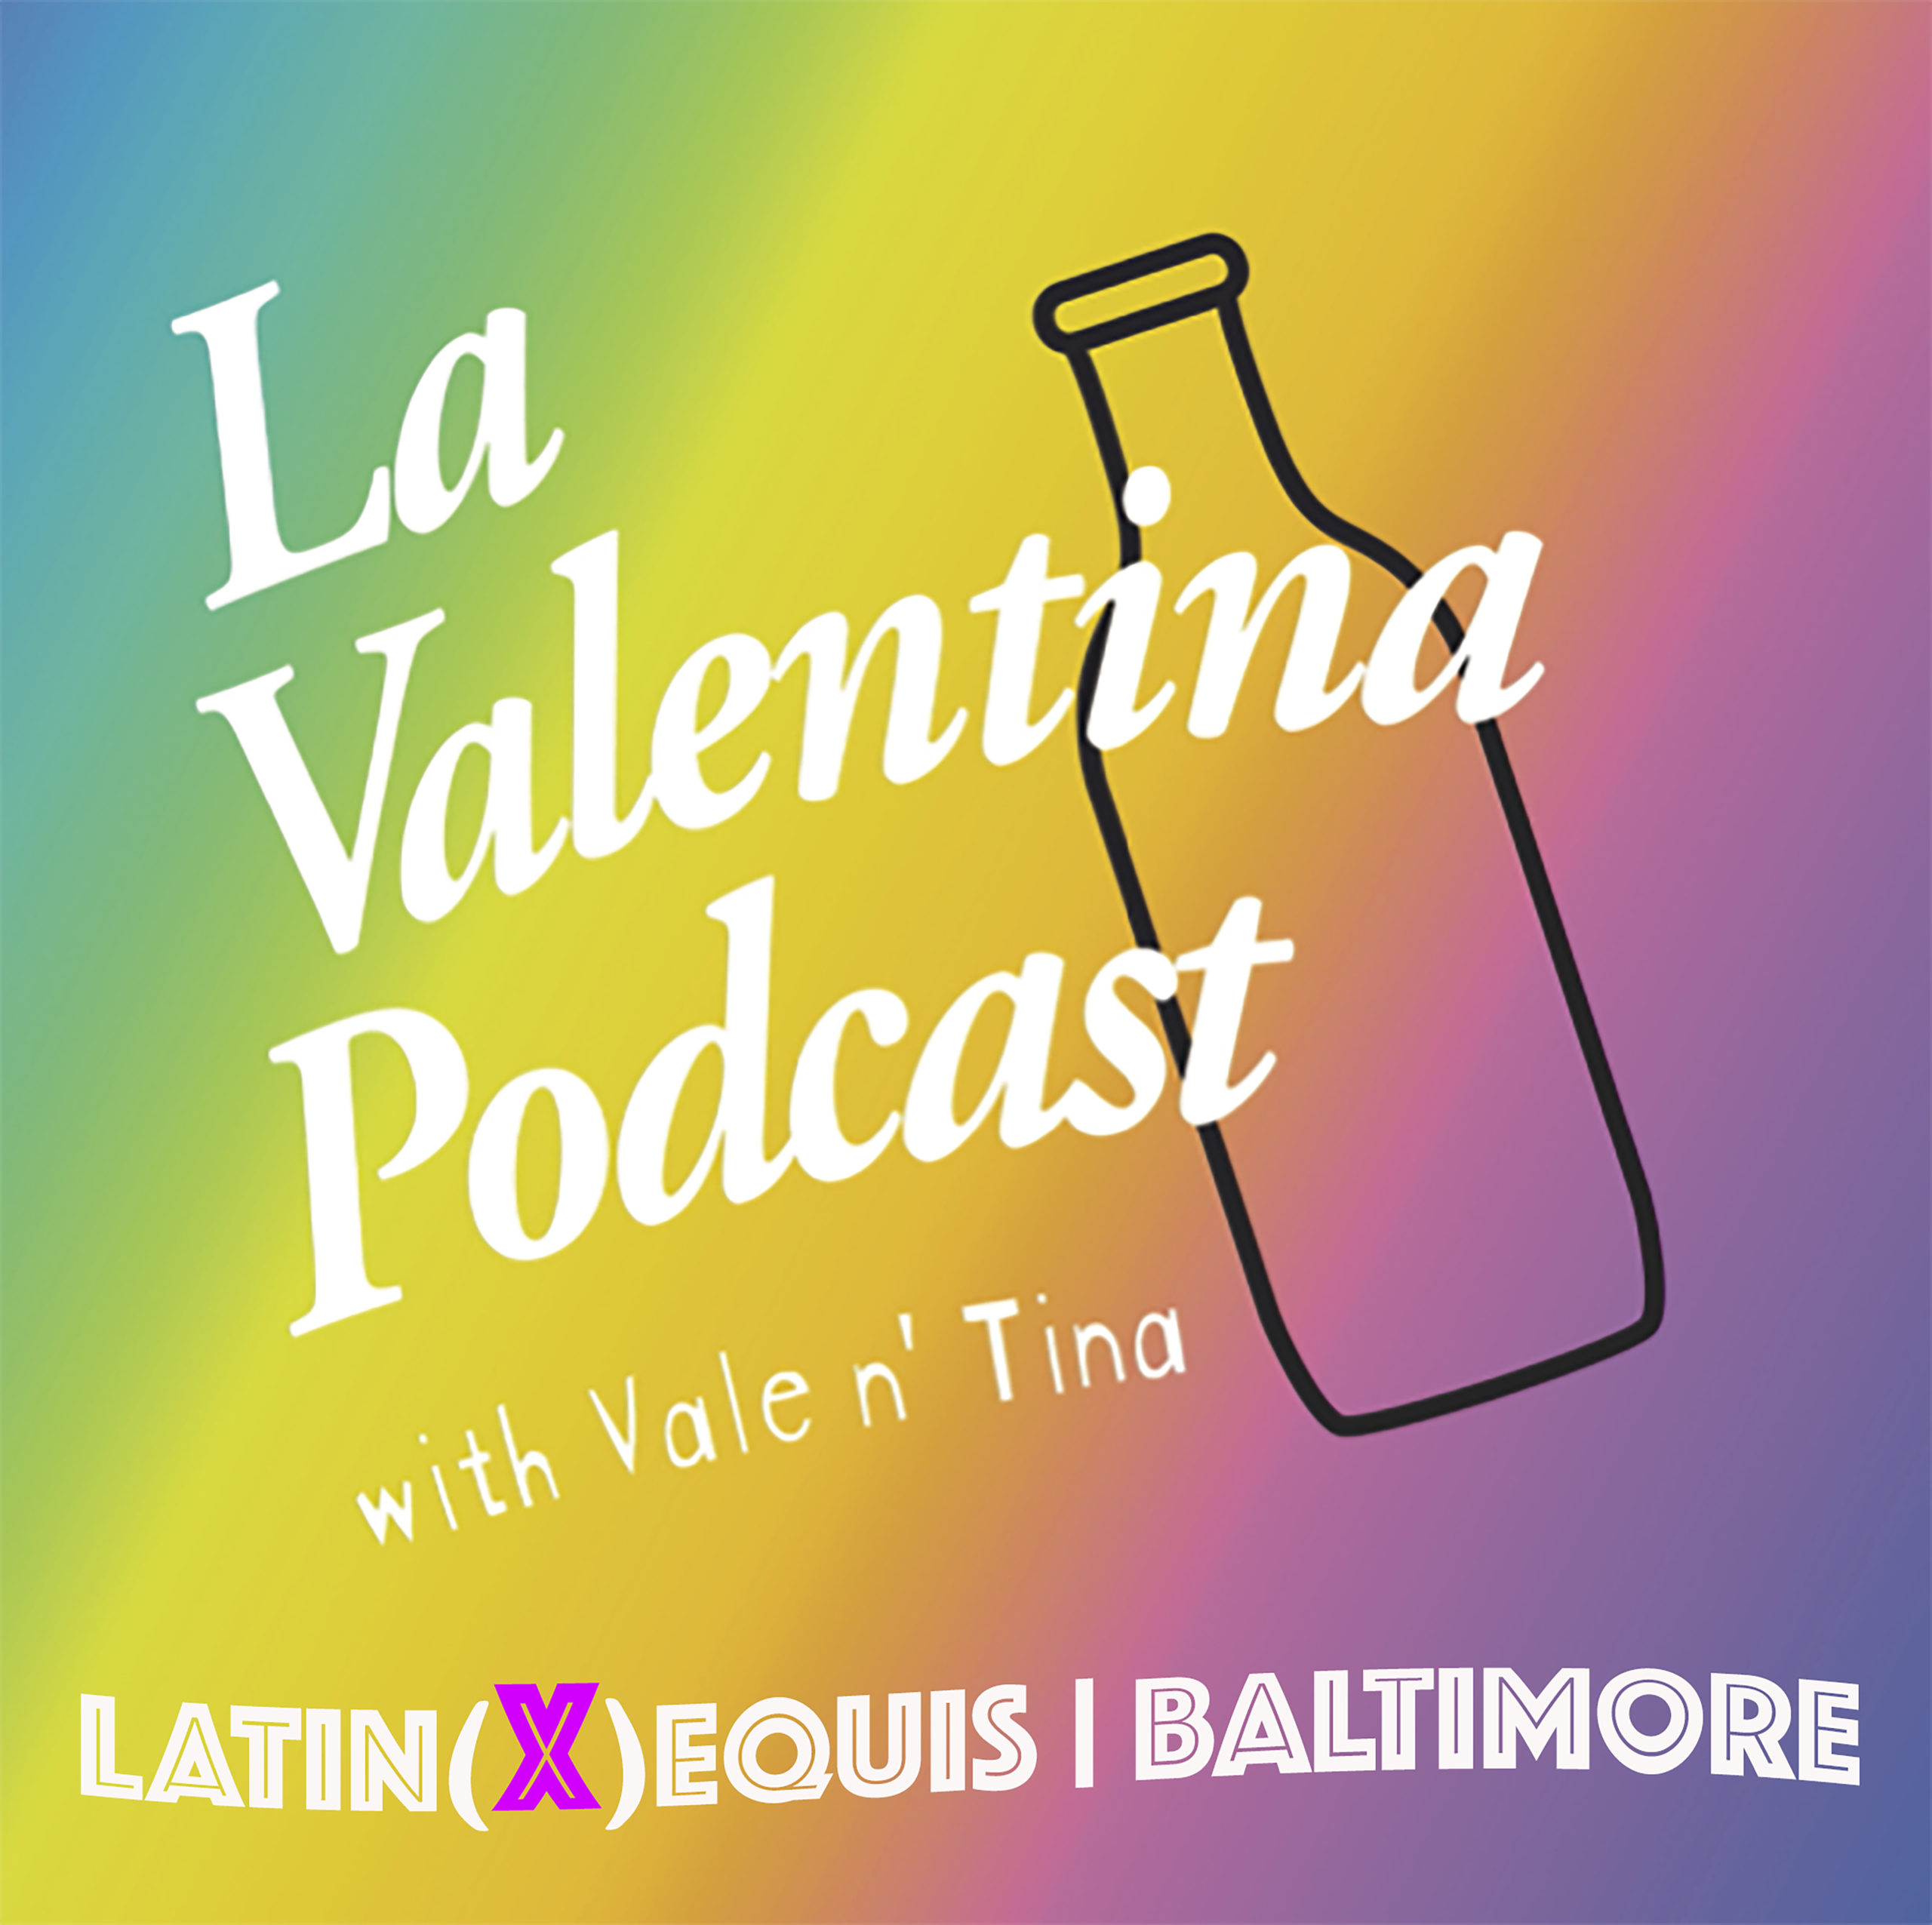 Flier for La Valentina Podcast. A rainbow toned background, the outline of a bottle and the text La Valentina Podcast with Vale n' Tina, Latin(X)Equis, Baltimore